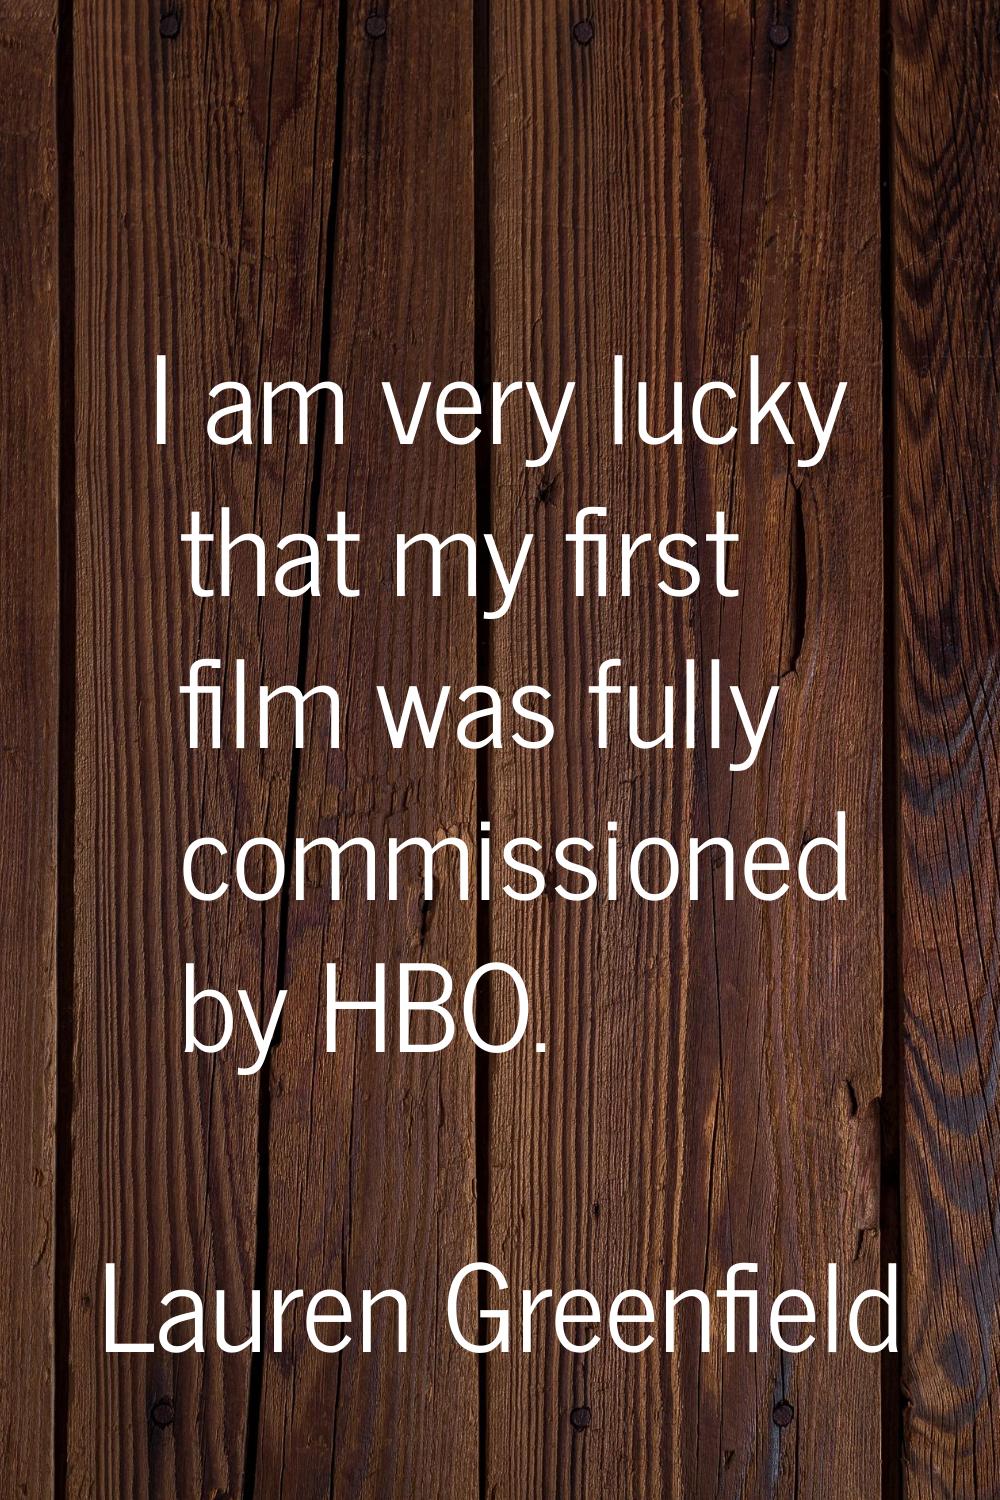 I am very lucky that my first film was fully commissioned by HBO.